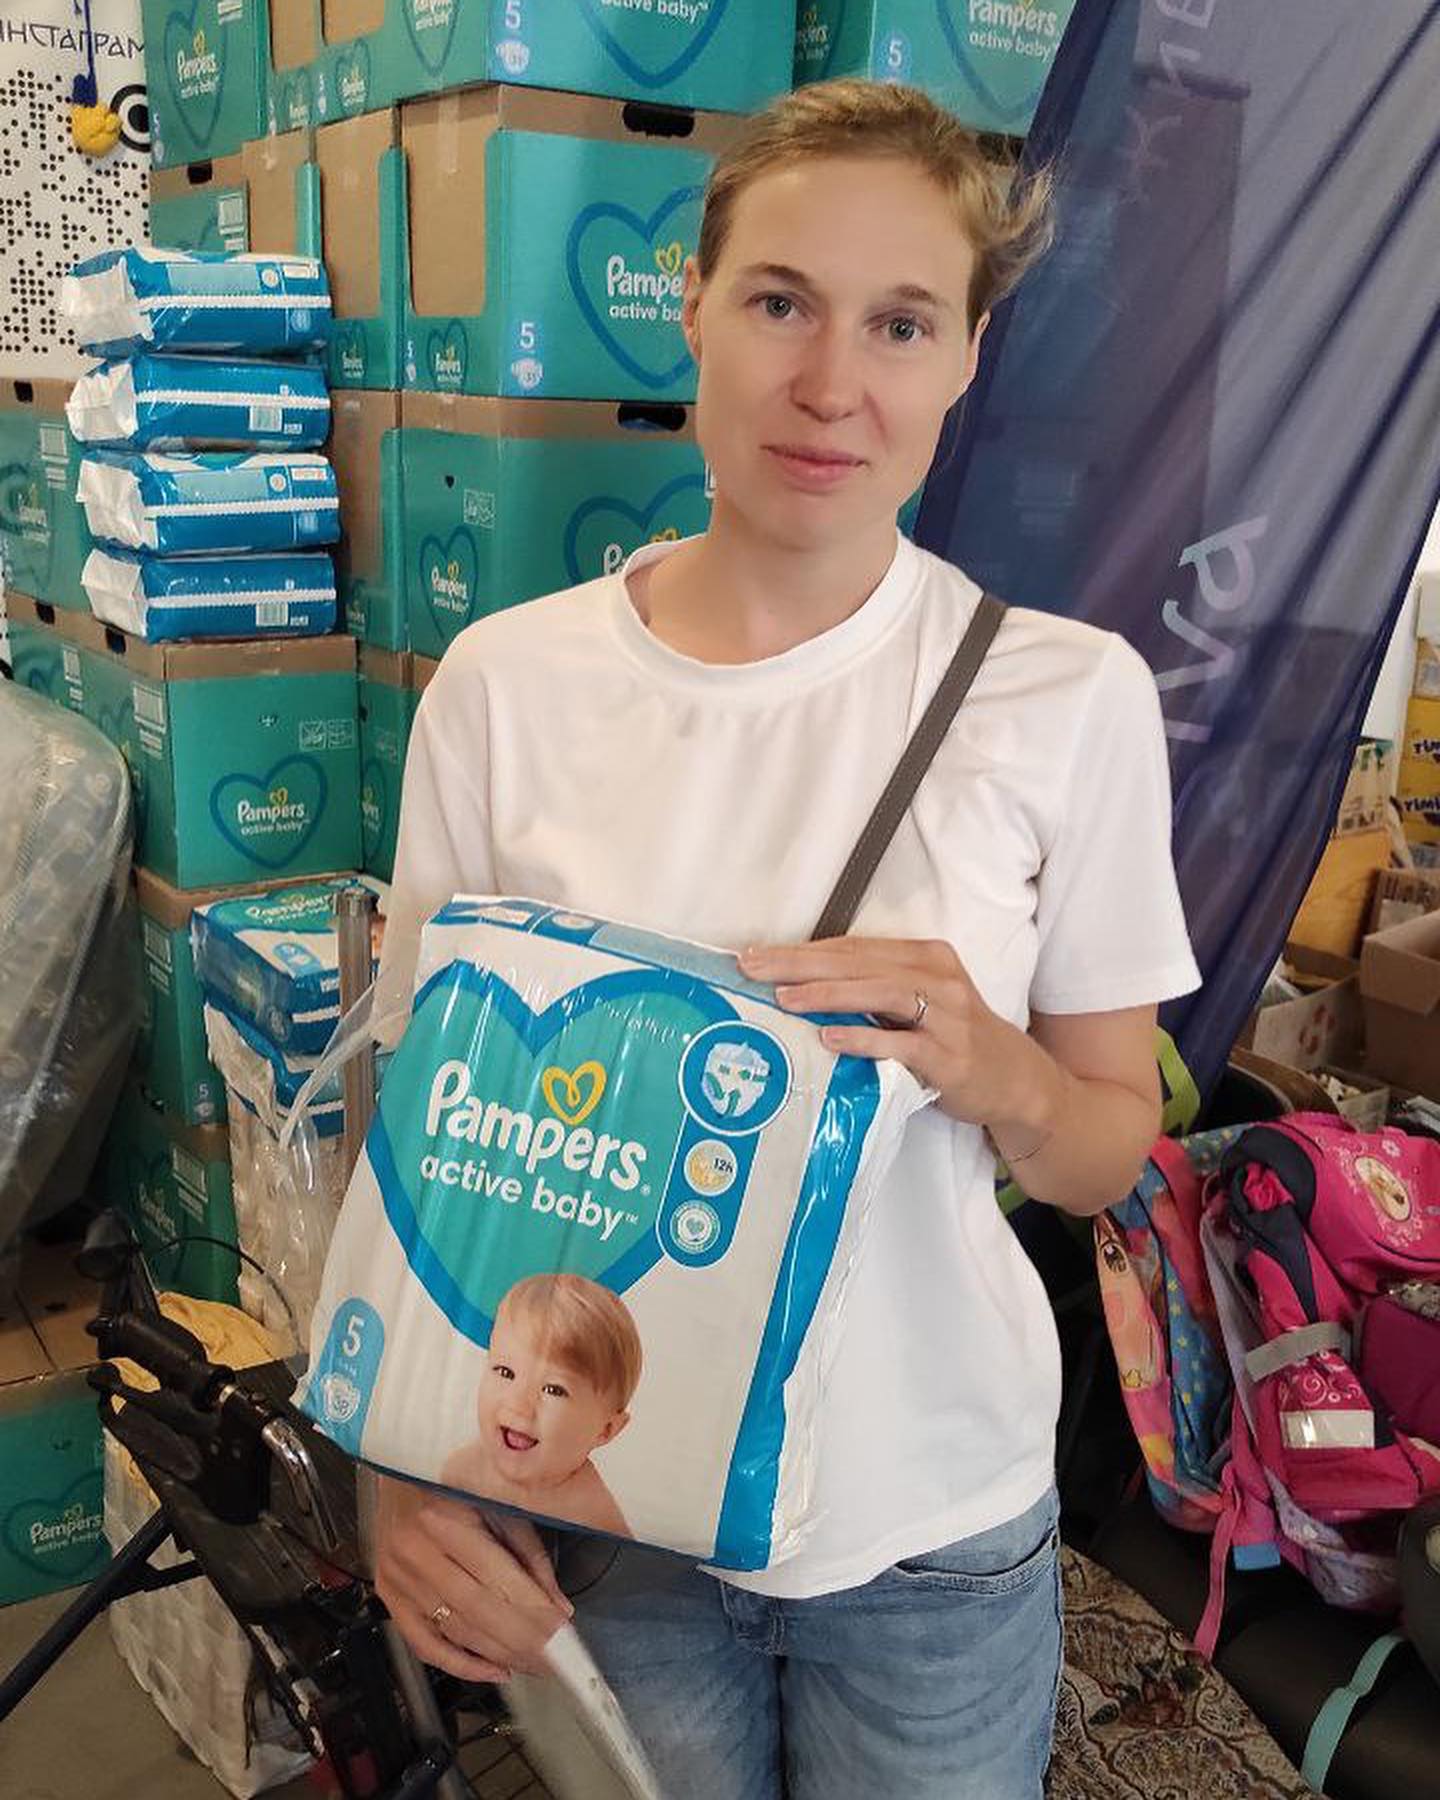 A woman holding a package of pampers diapers.